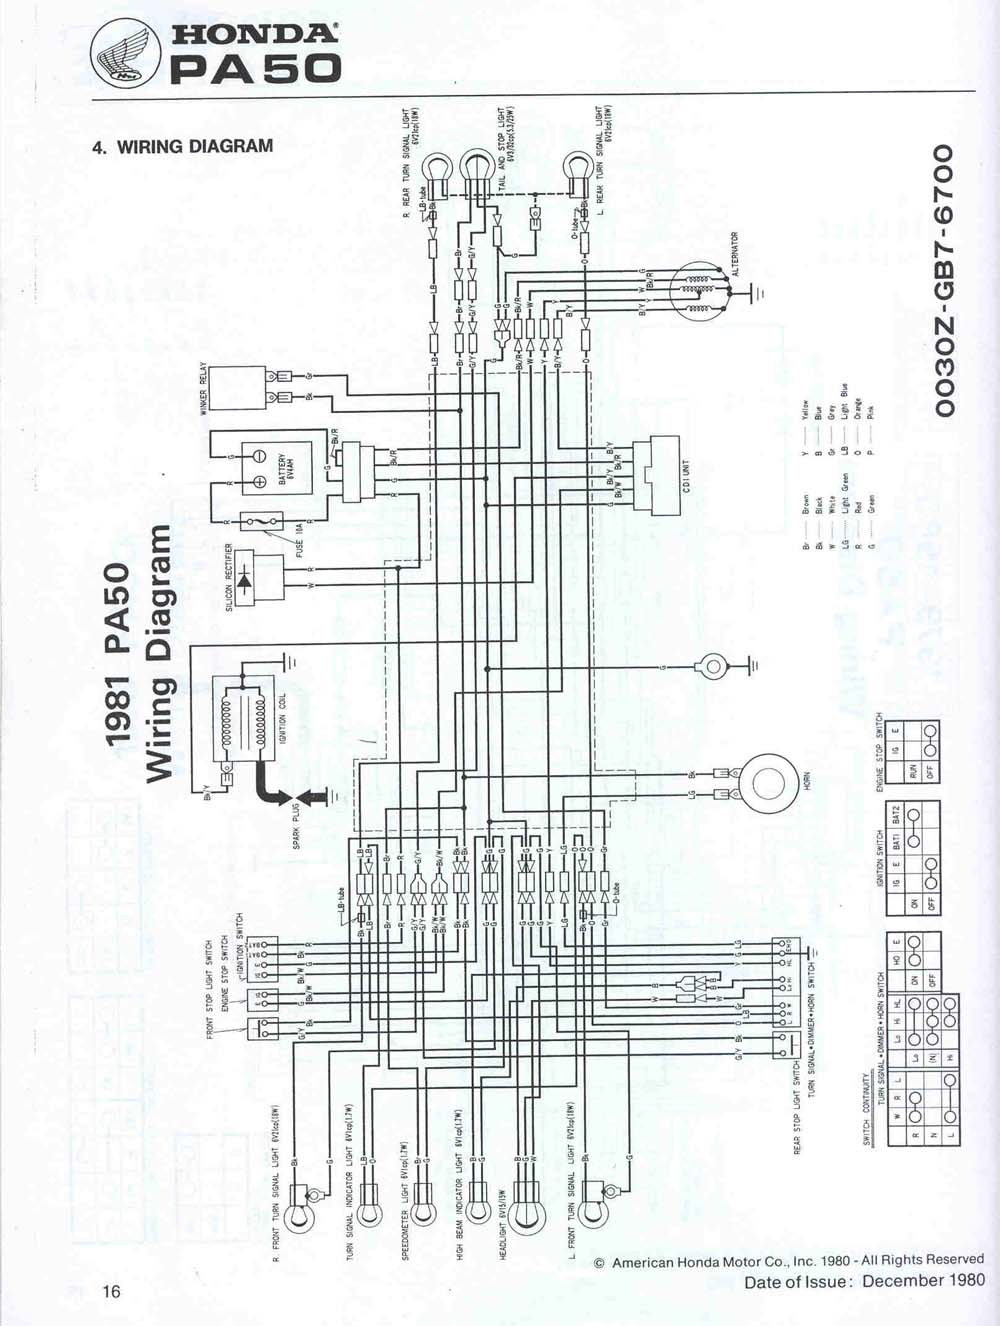 1980 tpgs-805 scooter wiring diagram